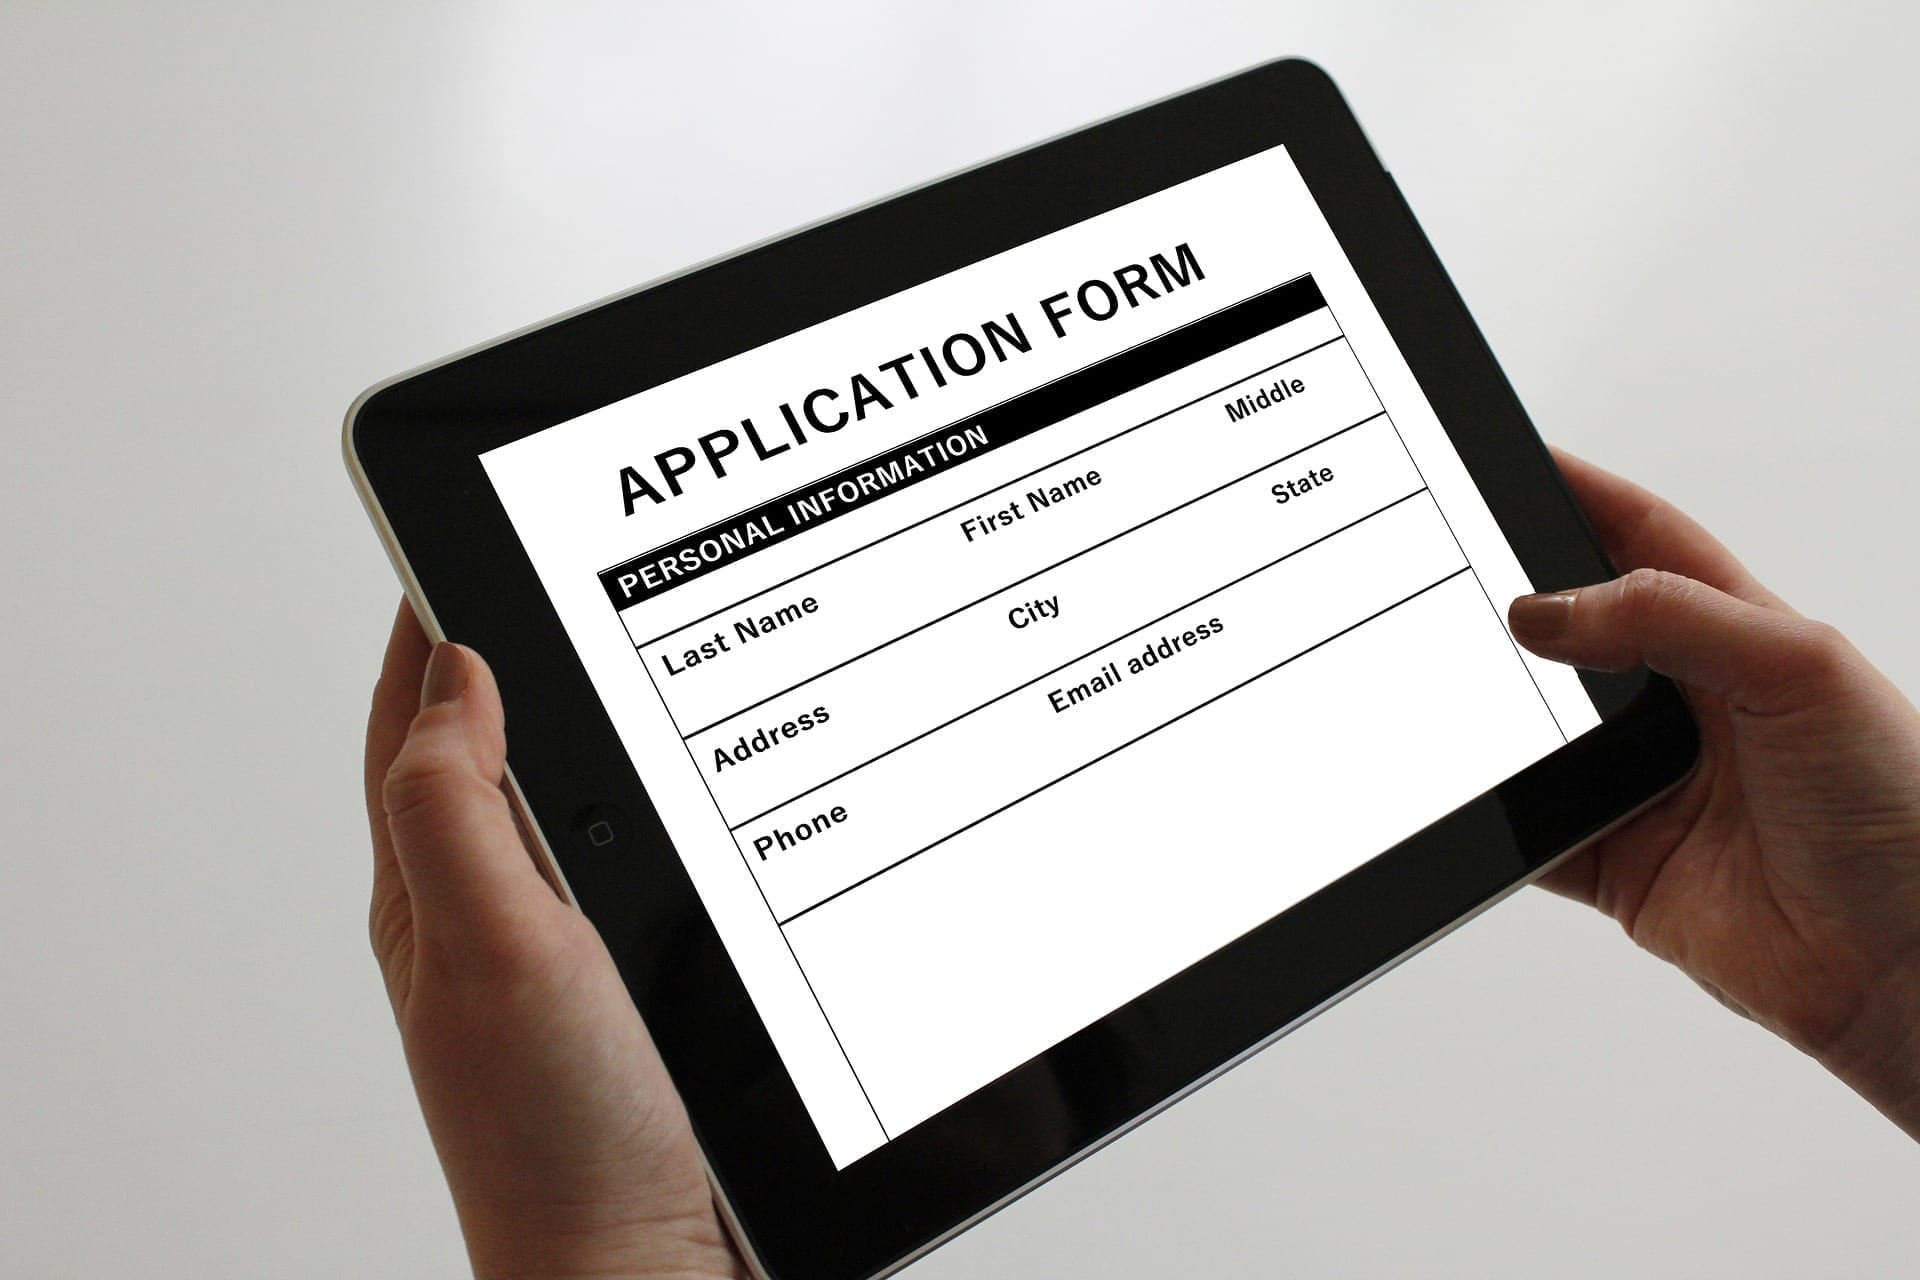 ipad with application form on it